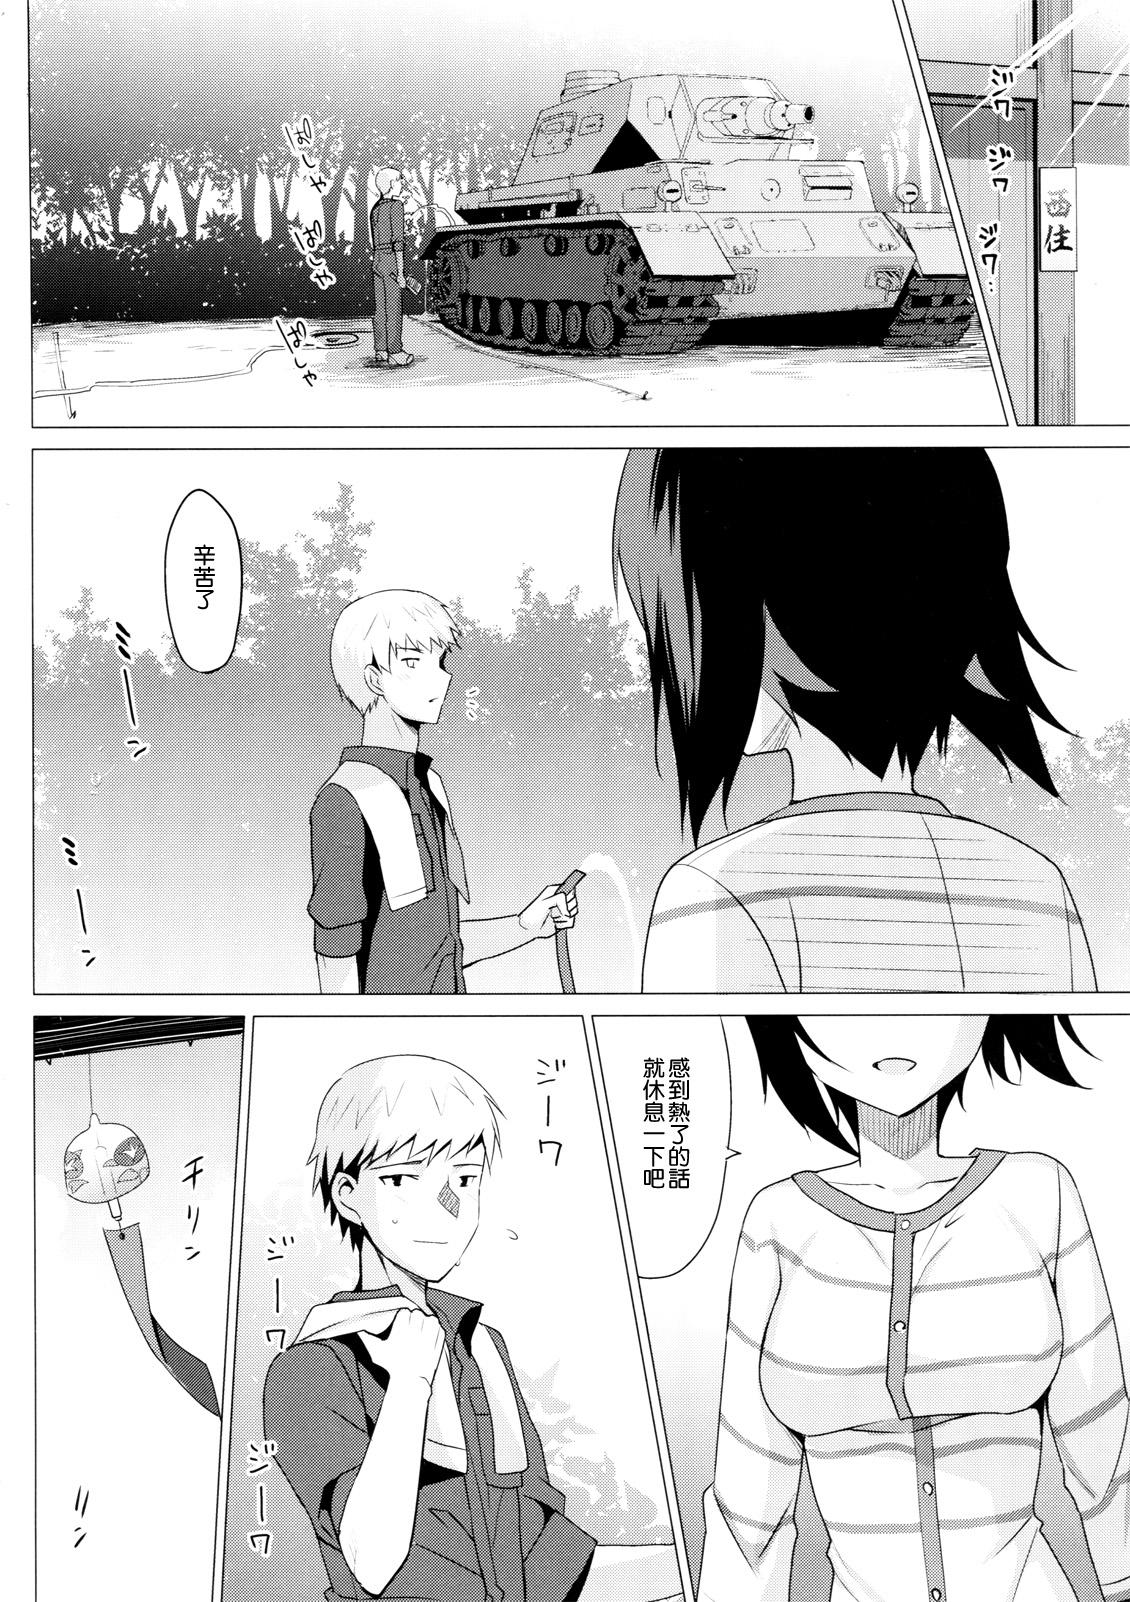 Student LET ME LOVE YOU - Girls und panzer Doll - Page 5